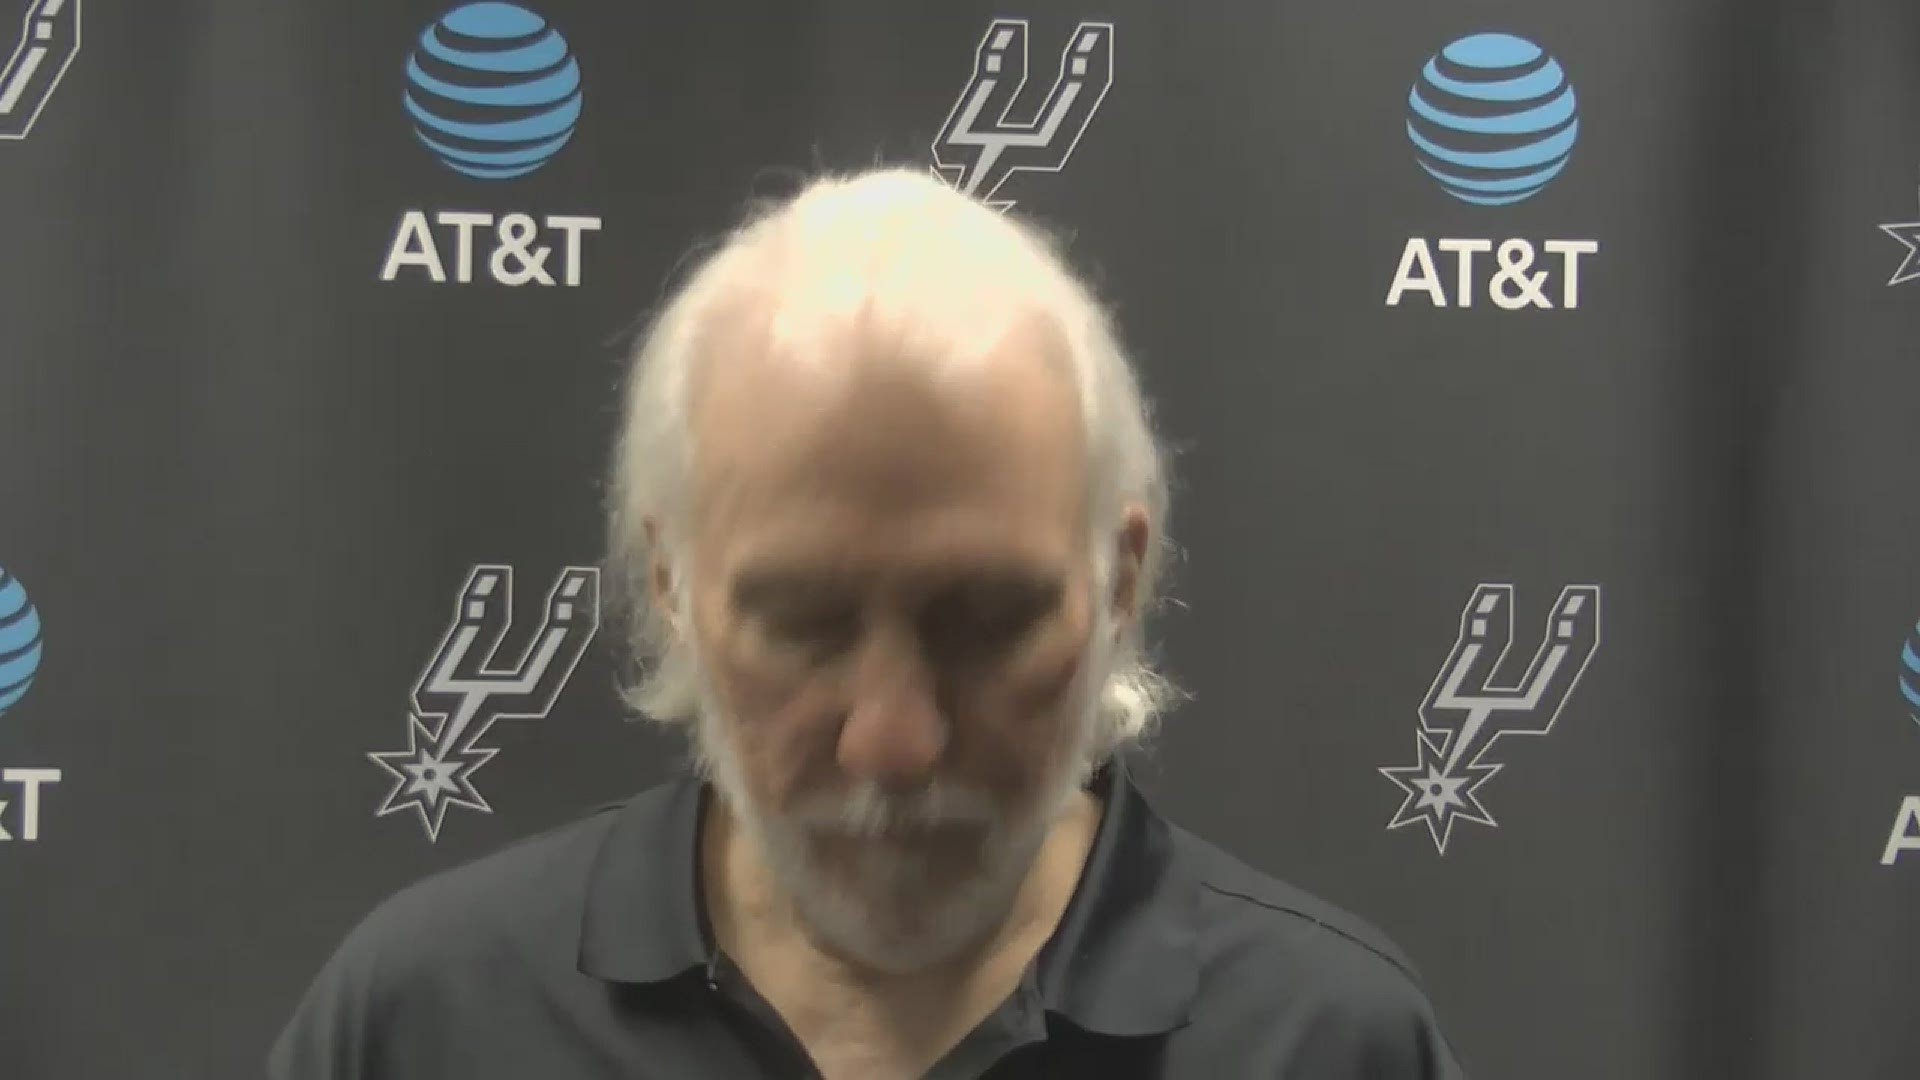 Popovich said his team did a good job defensively against a tough Denver team, and said the young kids have set the tone in that regard.